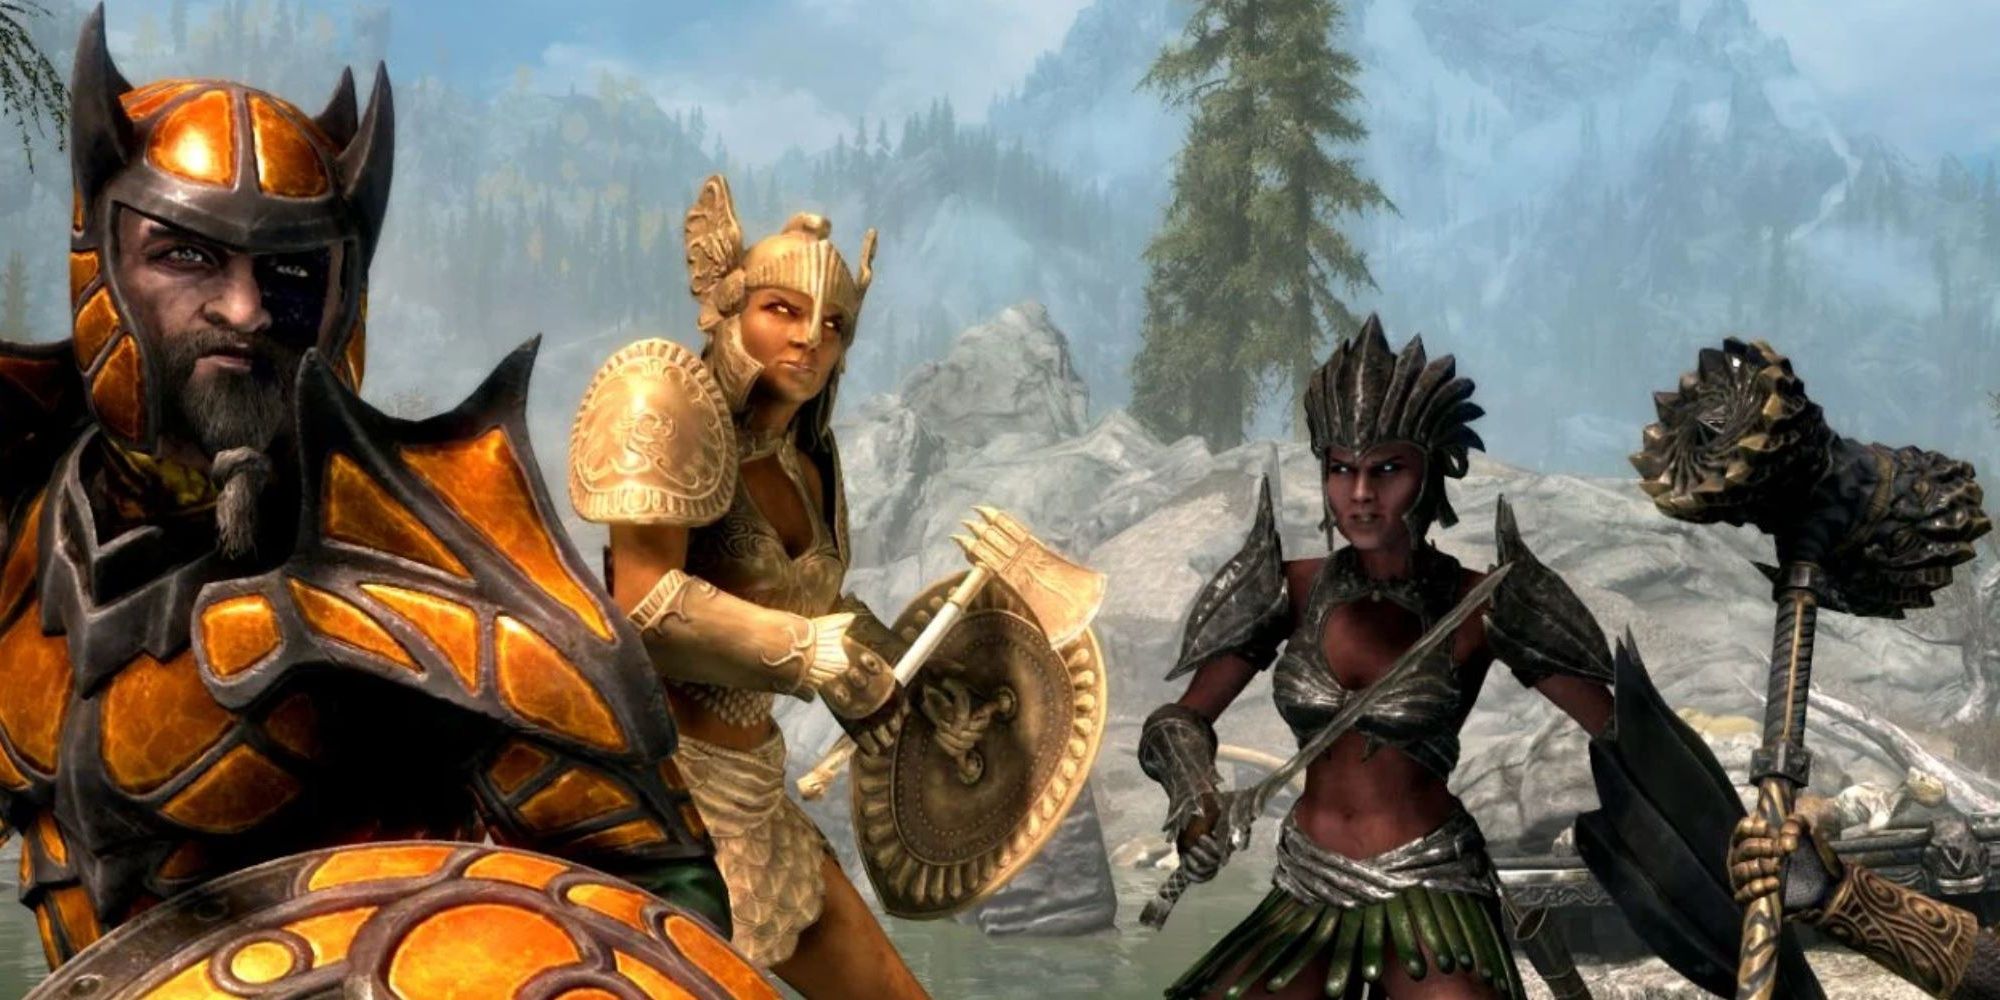 Skyrim anniversary mods, saints and seducers armor and weapons